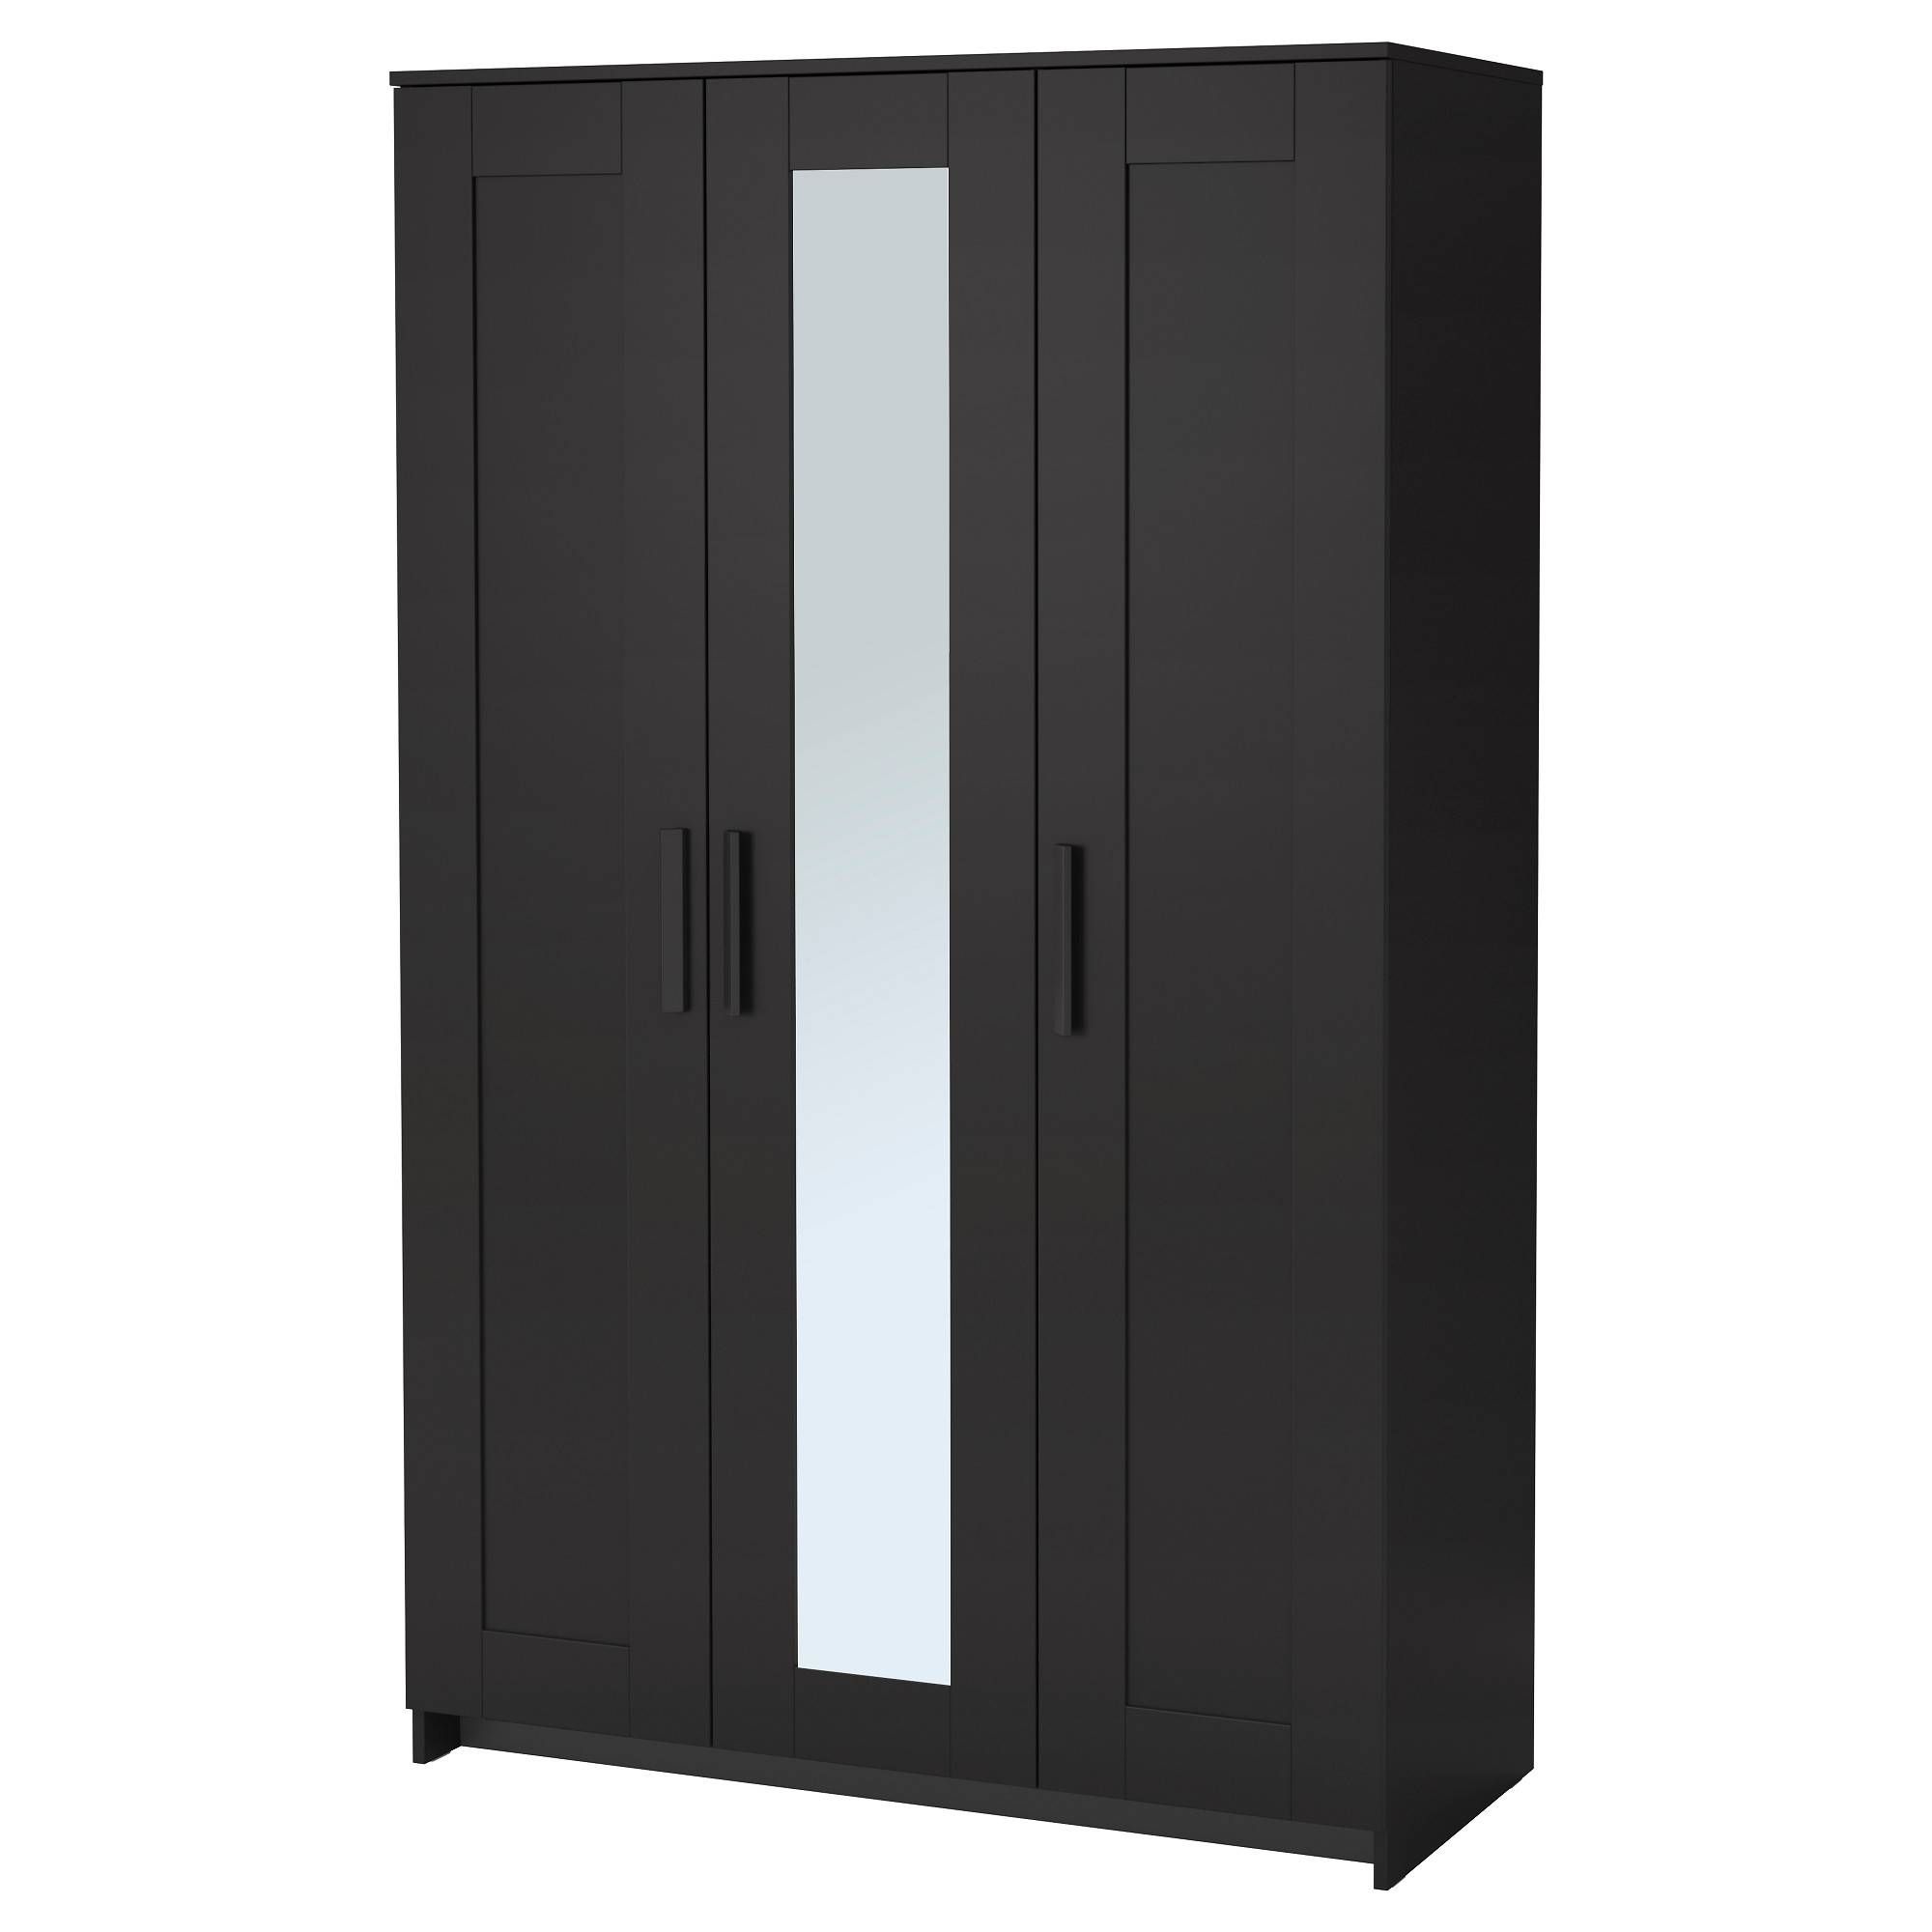 Wardrobes, Armoires & Closets – Ikea Pertaining To Single Black Wardrobes (View 10 of 15)